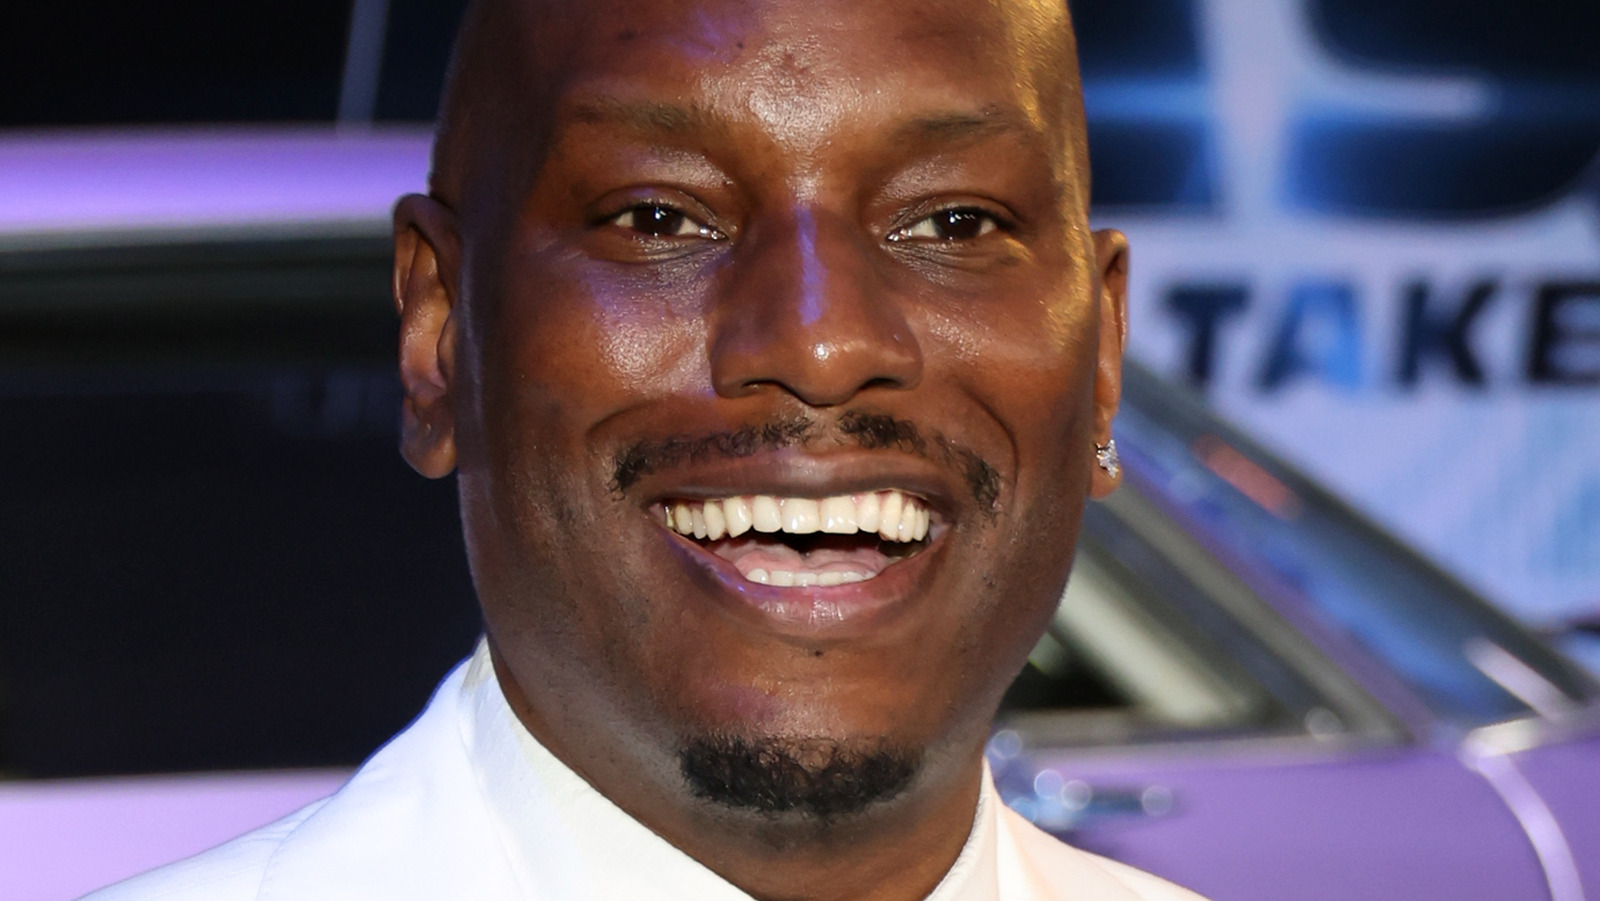 Tyrese Gibson's Split From His Estranged Wife Samantha Lee Got Messy In Court